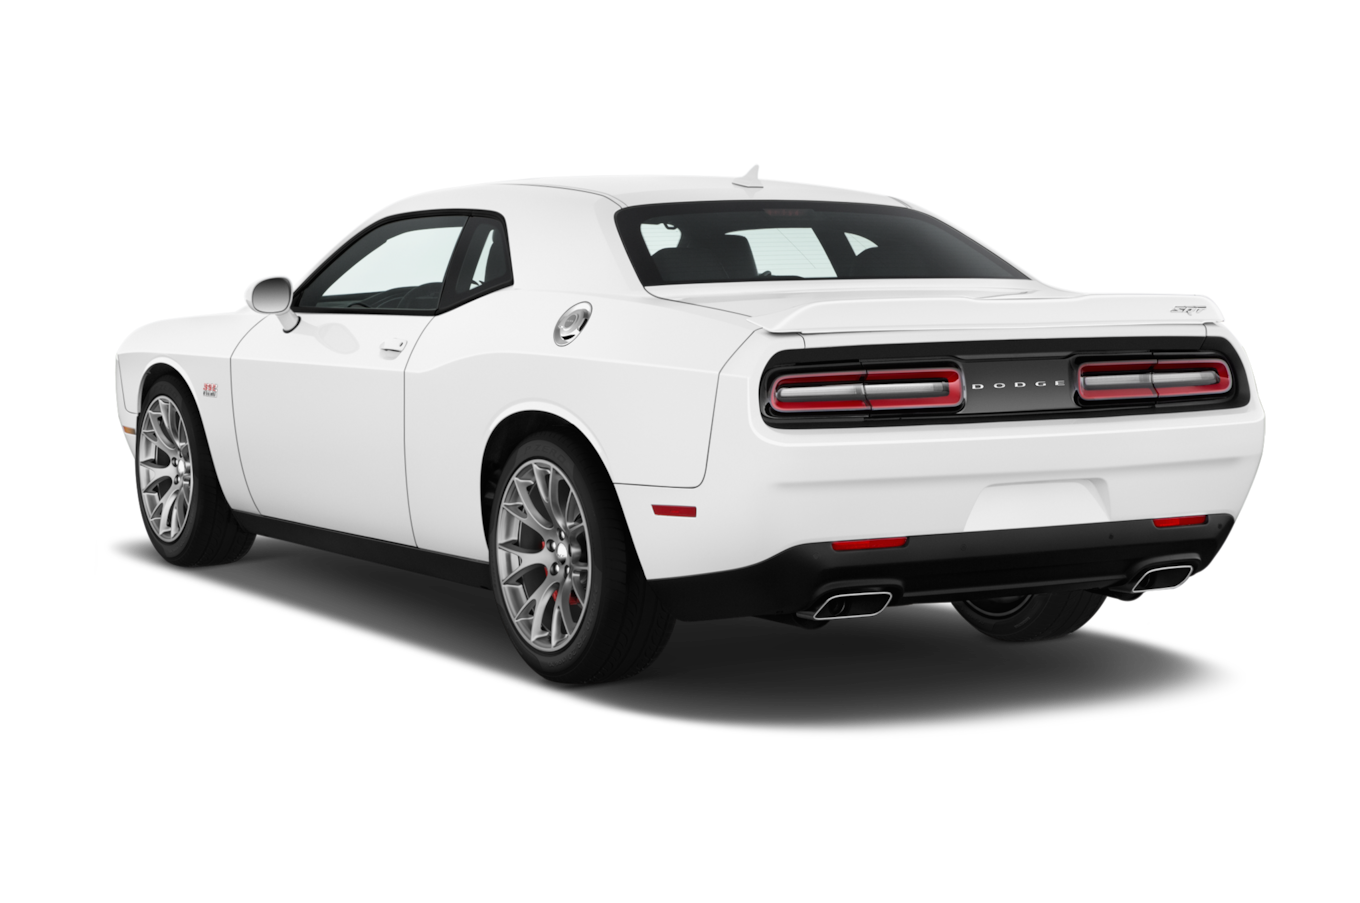 Dodge Challenger Muscle 2018 Car Free Clipart HQ PNG Image